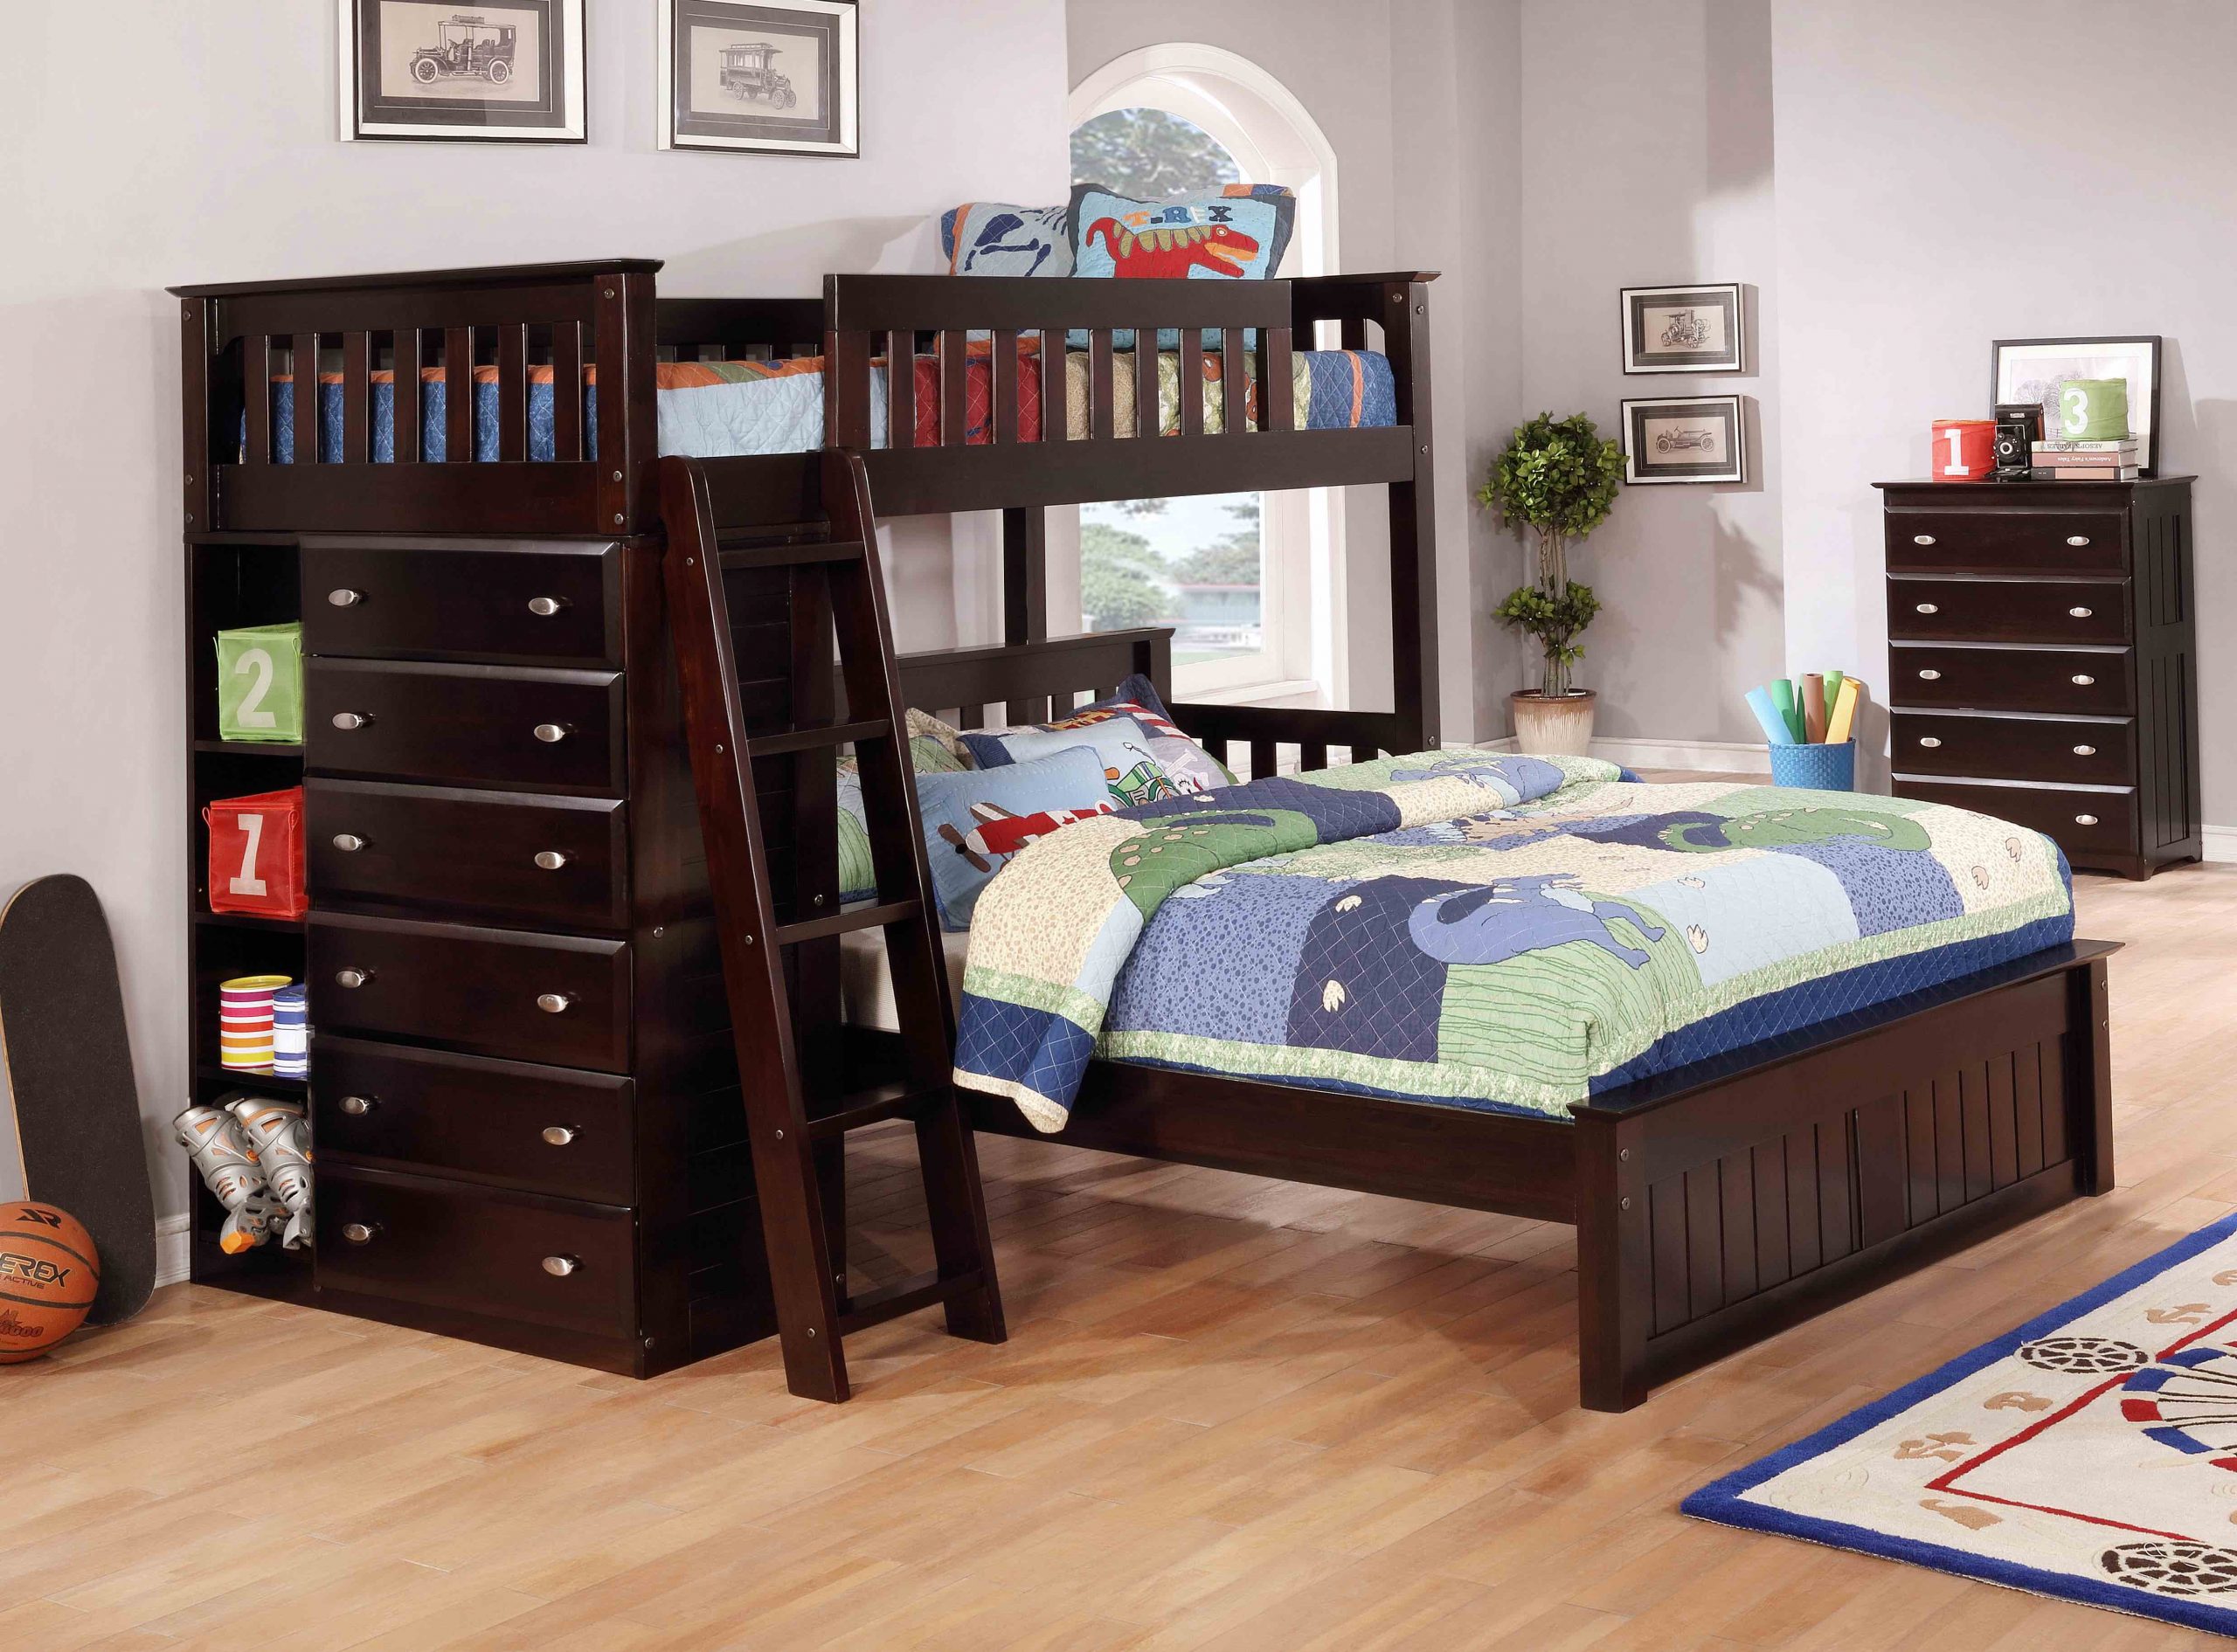 Twin bunk bed sets